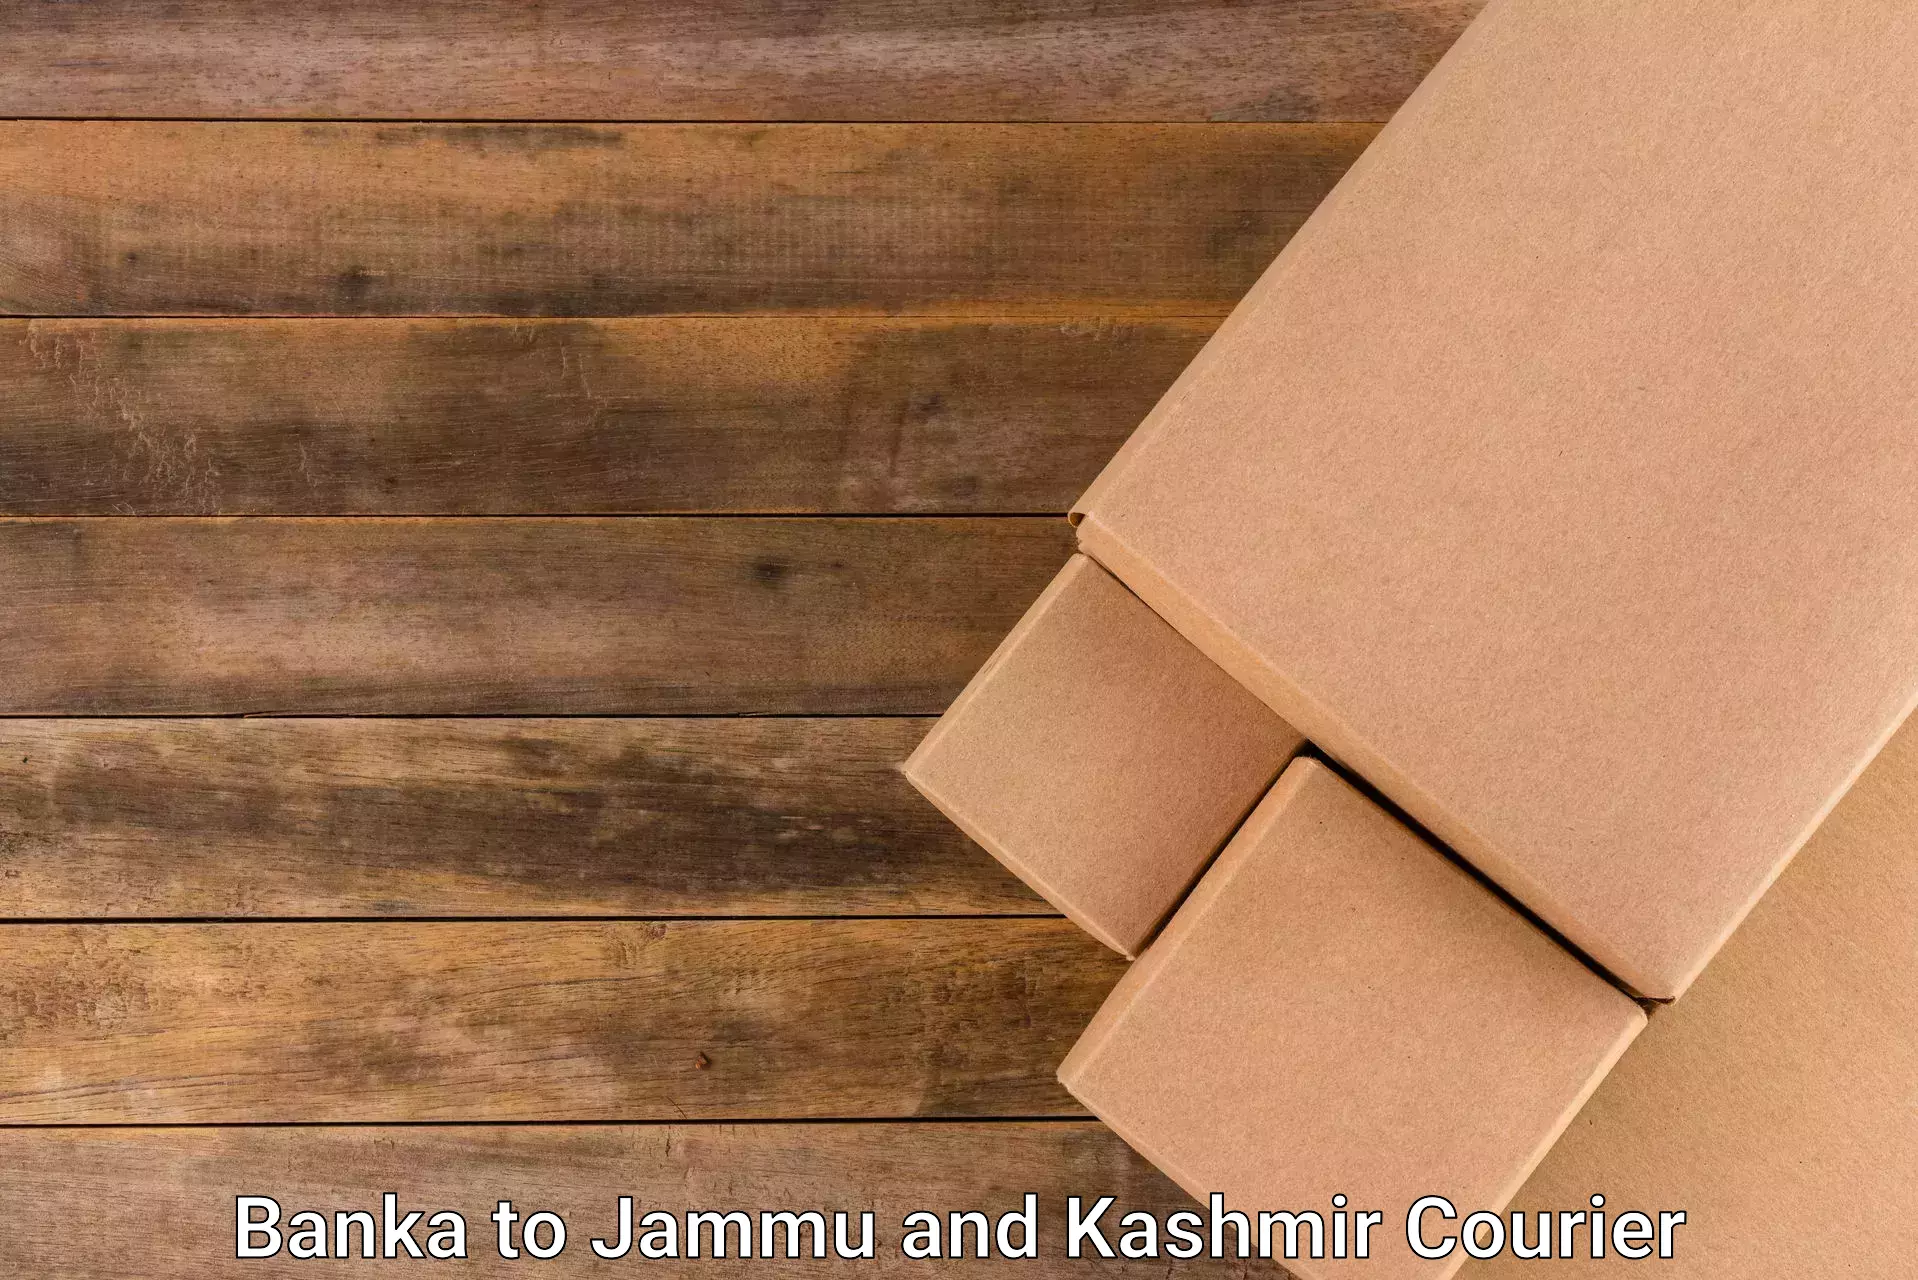 Courier app Banka to Udhampur